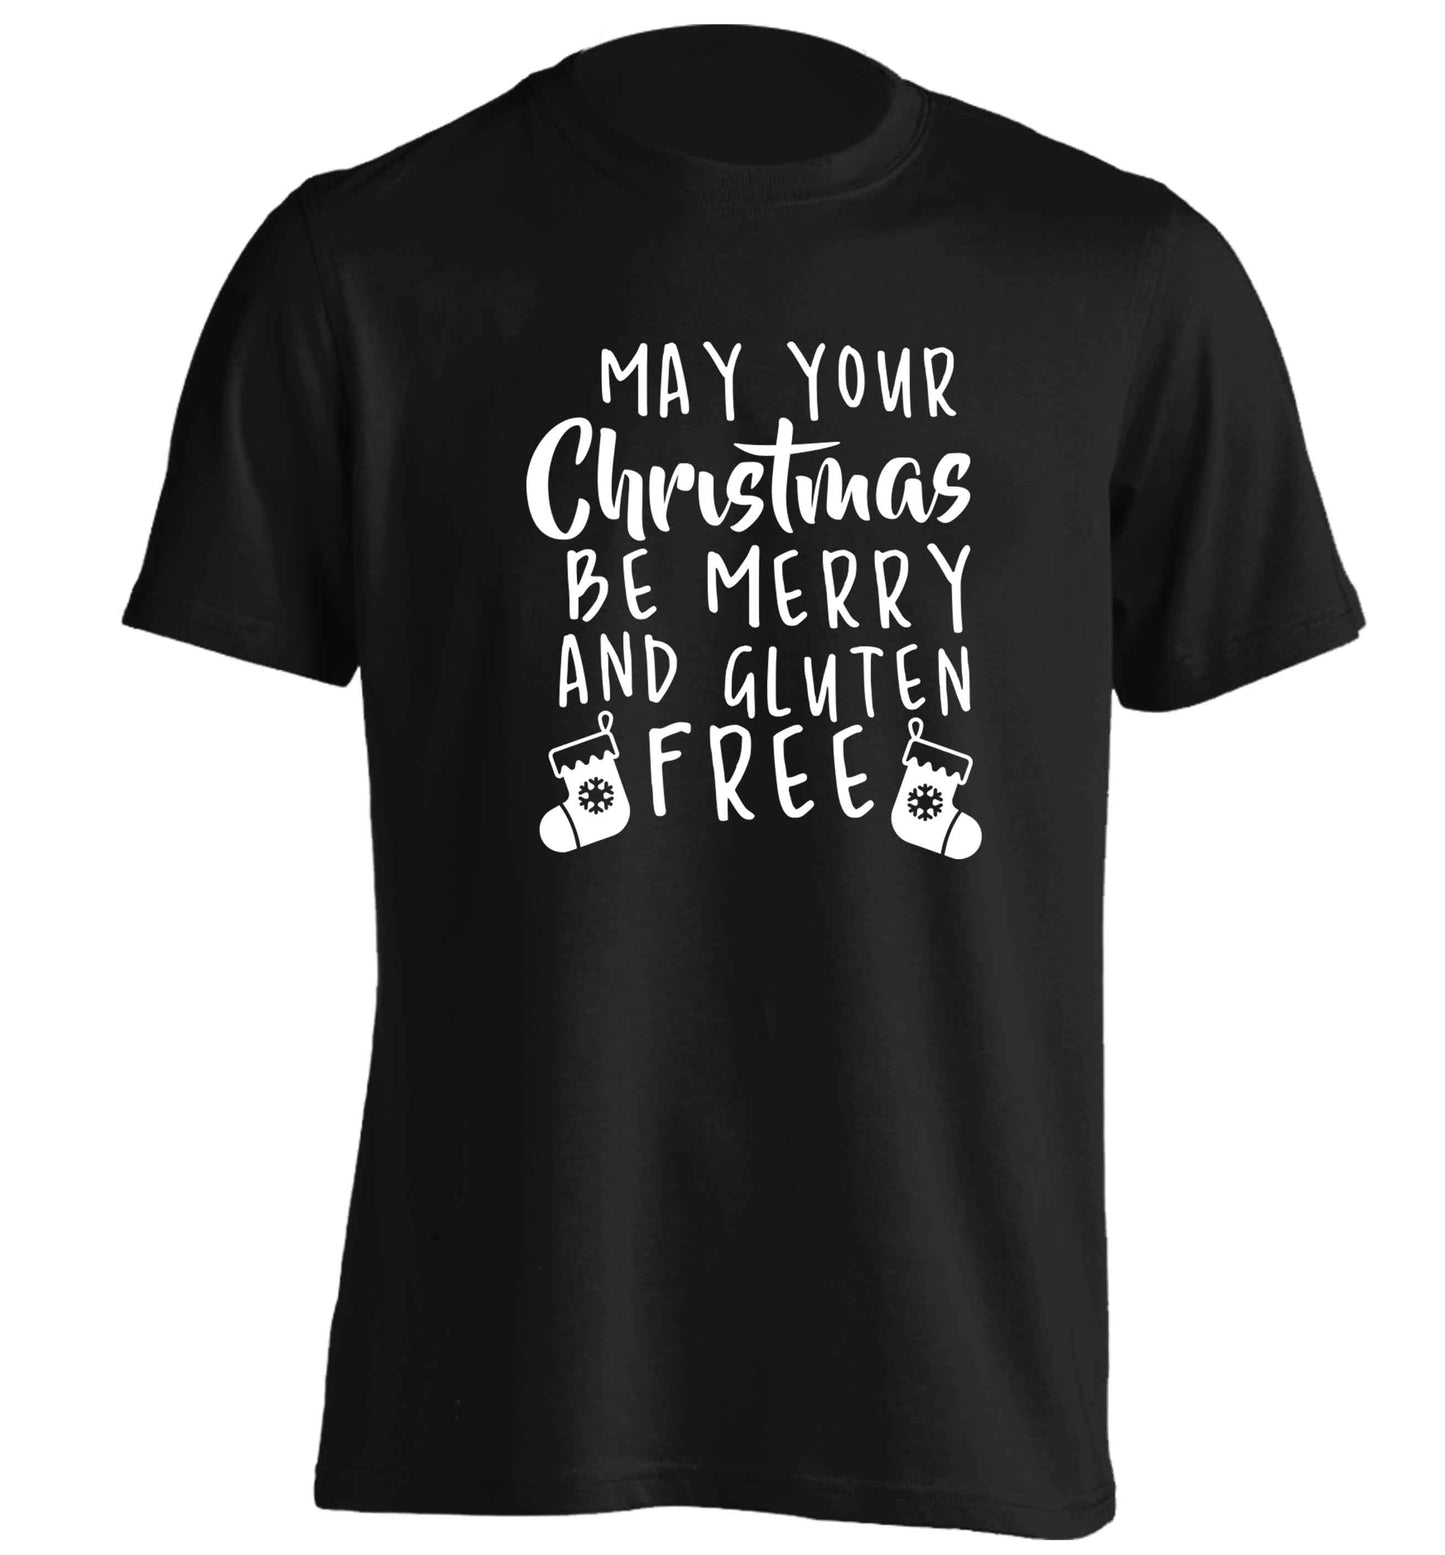 May your Christmas be merry and gluten free adults unisex black Tshirt 2XL